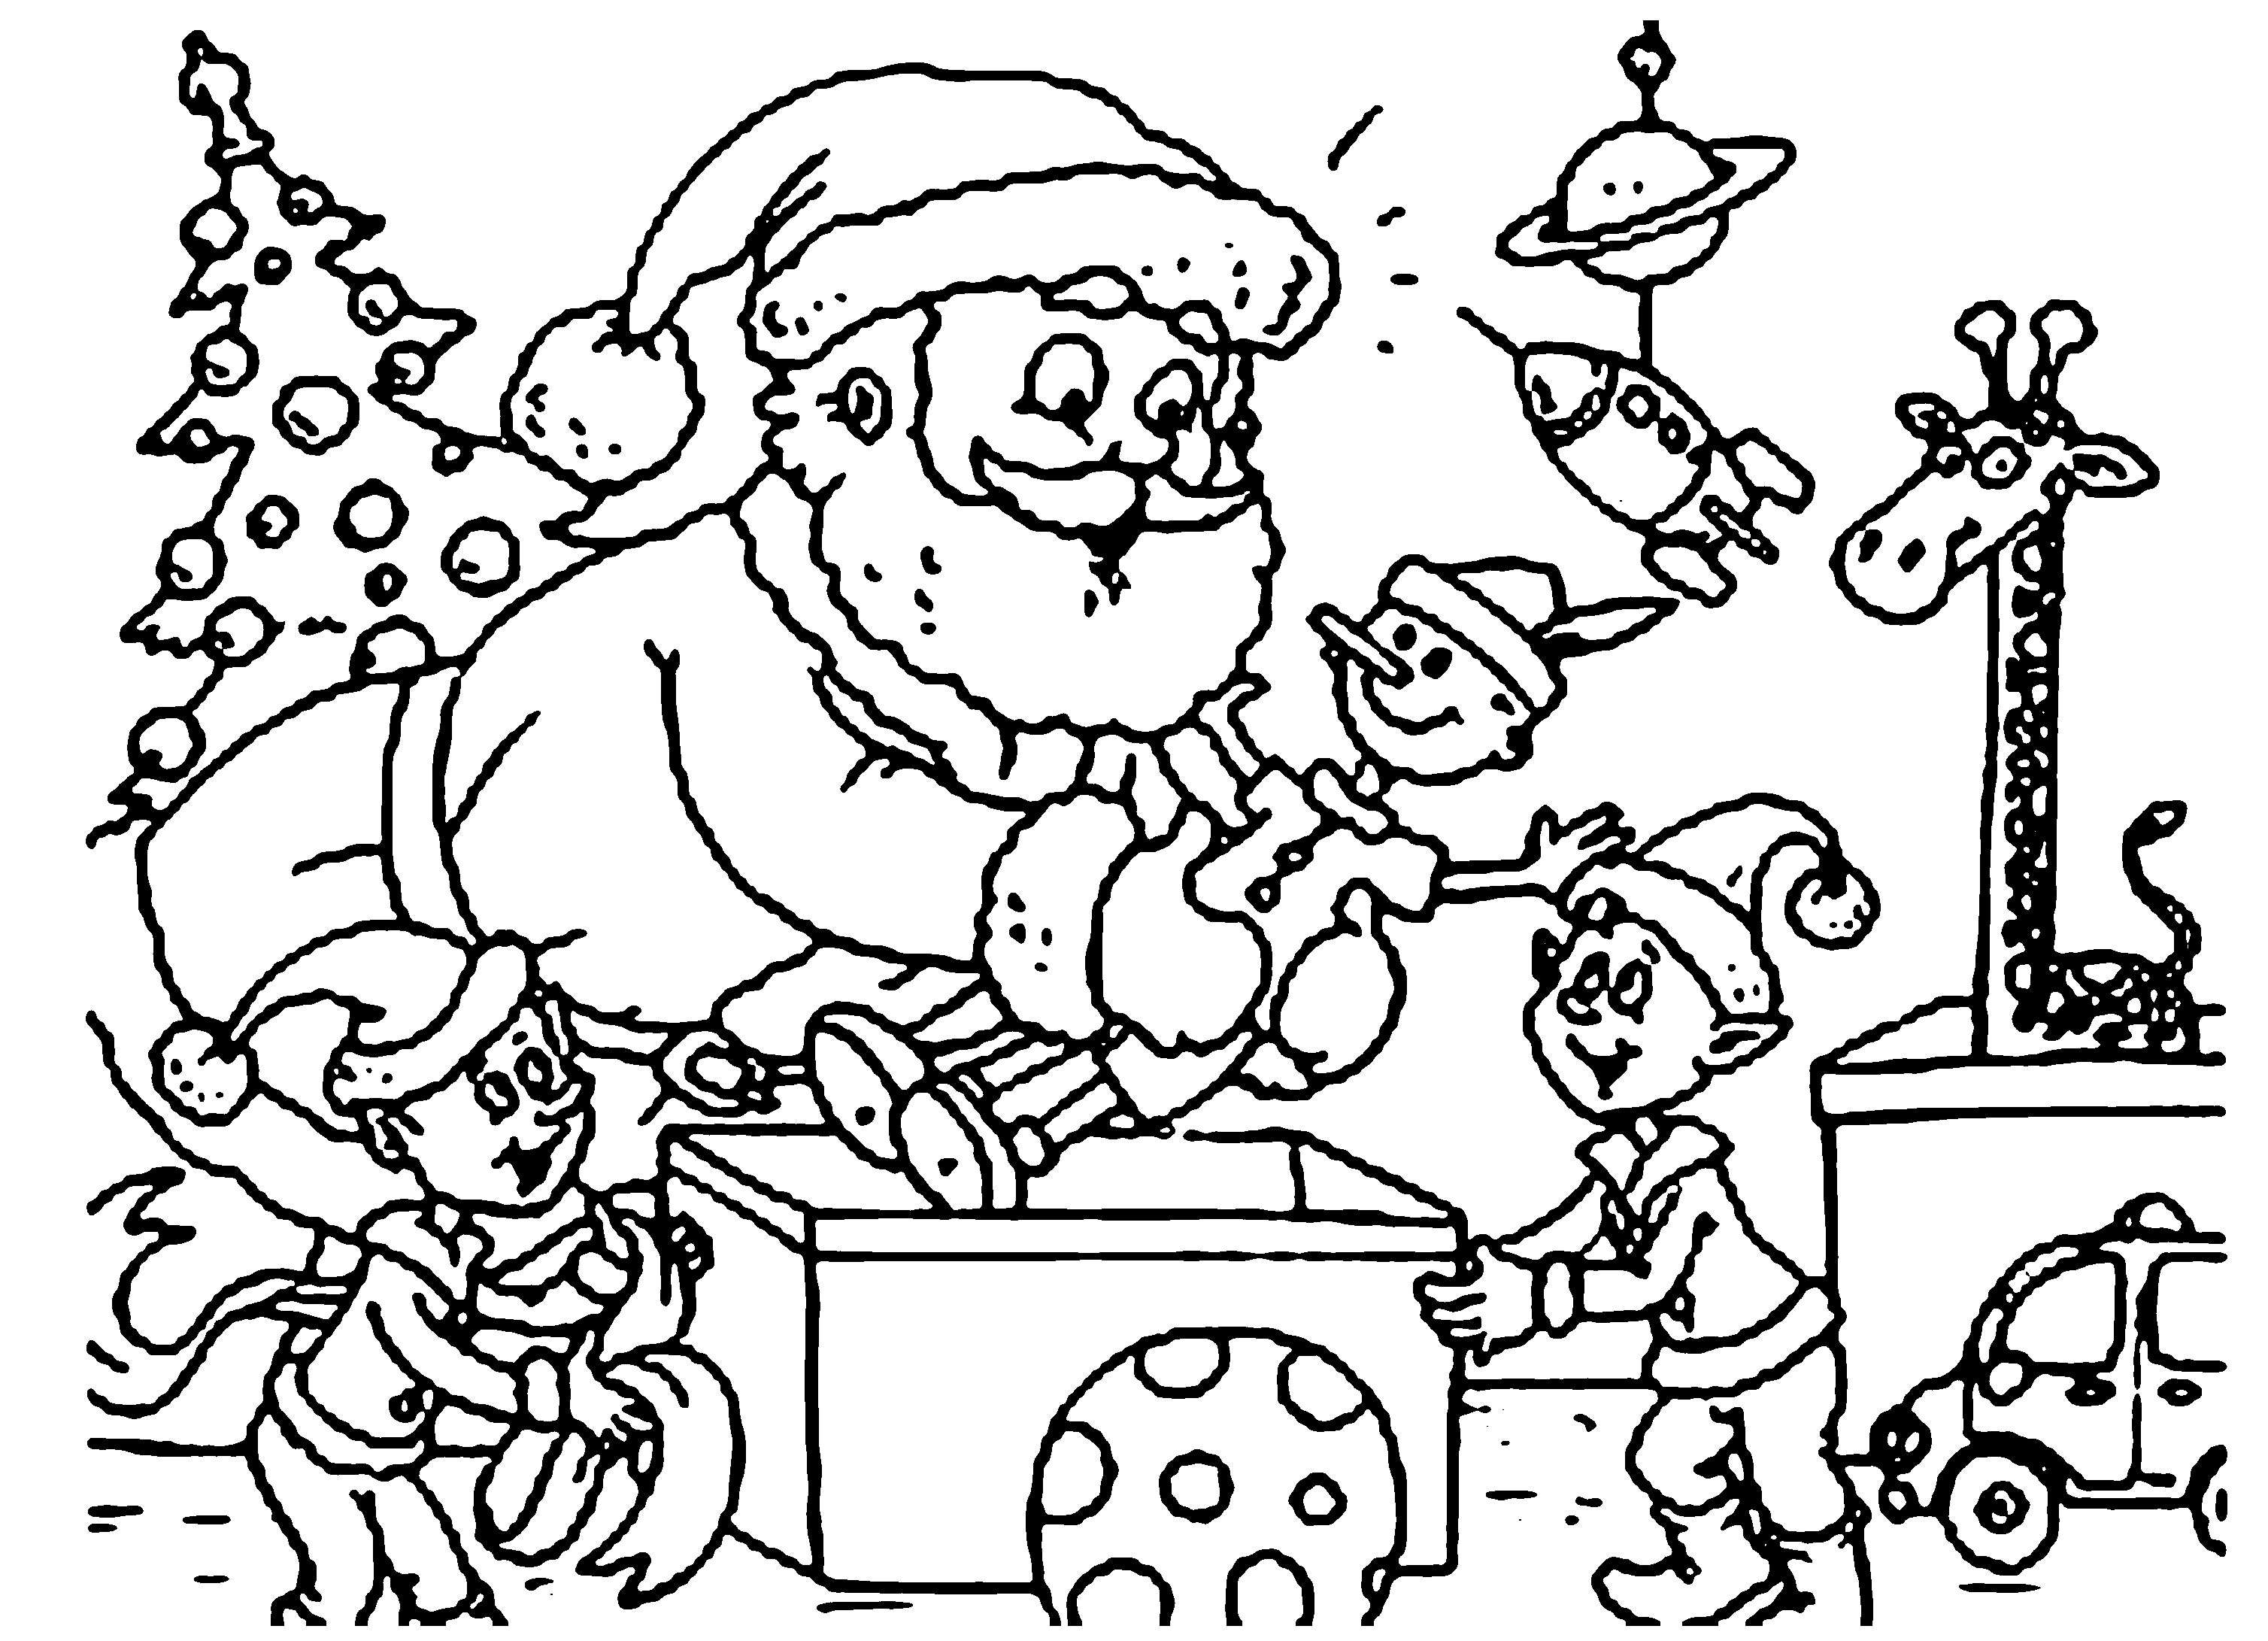 Elf On The Shelf Coloring Pages To Print - Coloring Home